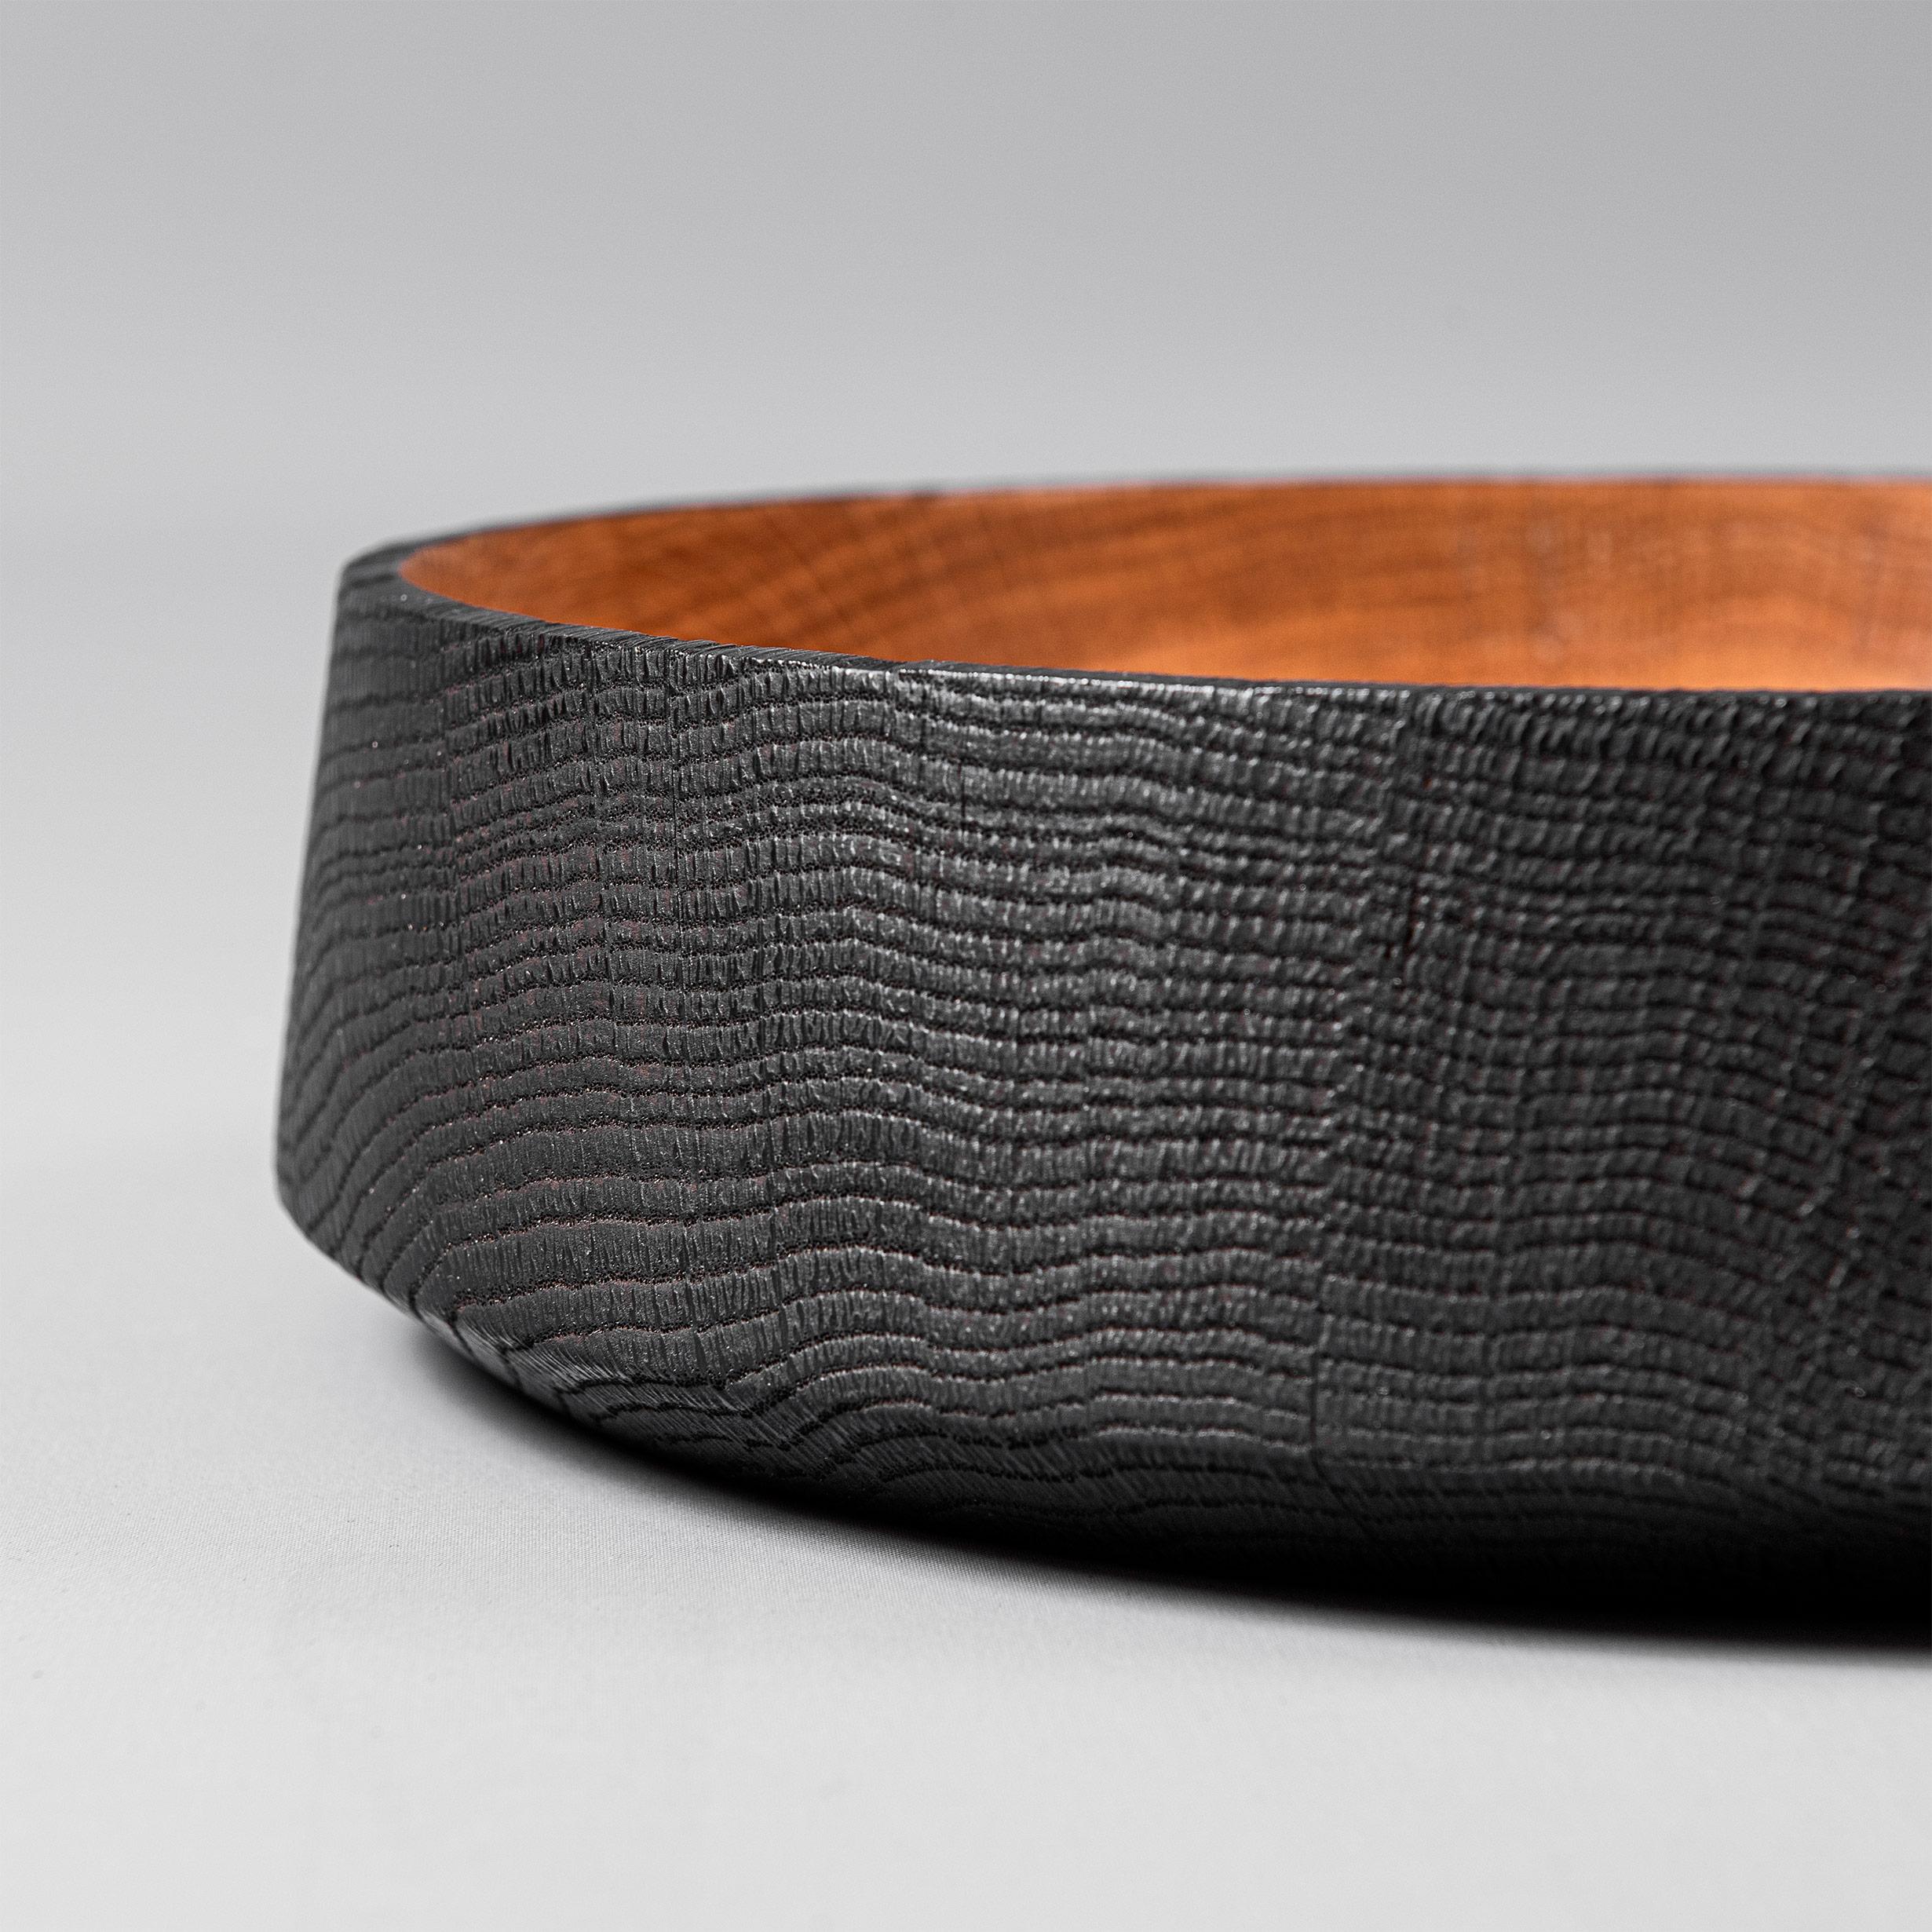 Fine traditionally hand-crafted and turned Oak half Japanese Yakisugi platter - bowl. These unique pieces are handmade to the very best quality in London using traditional techniques.
Finished in food safe oil.
A beautiful piece of handmade